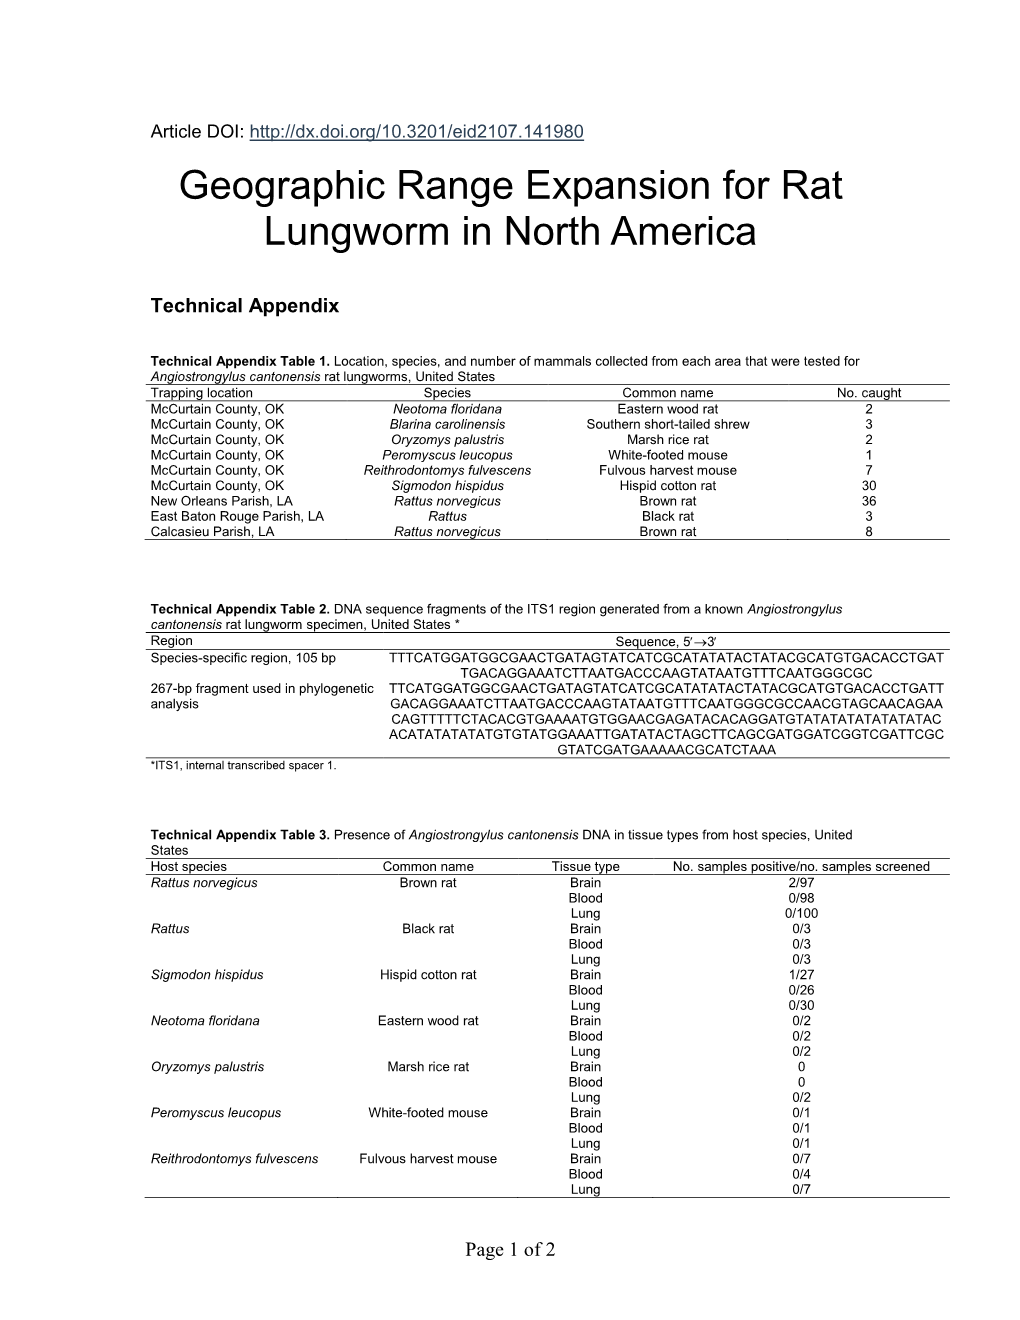 Geographic Range Expansion for Rat Lungworm in North America